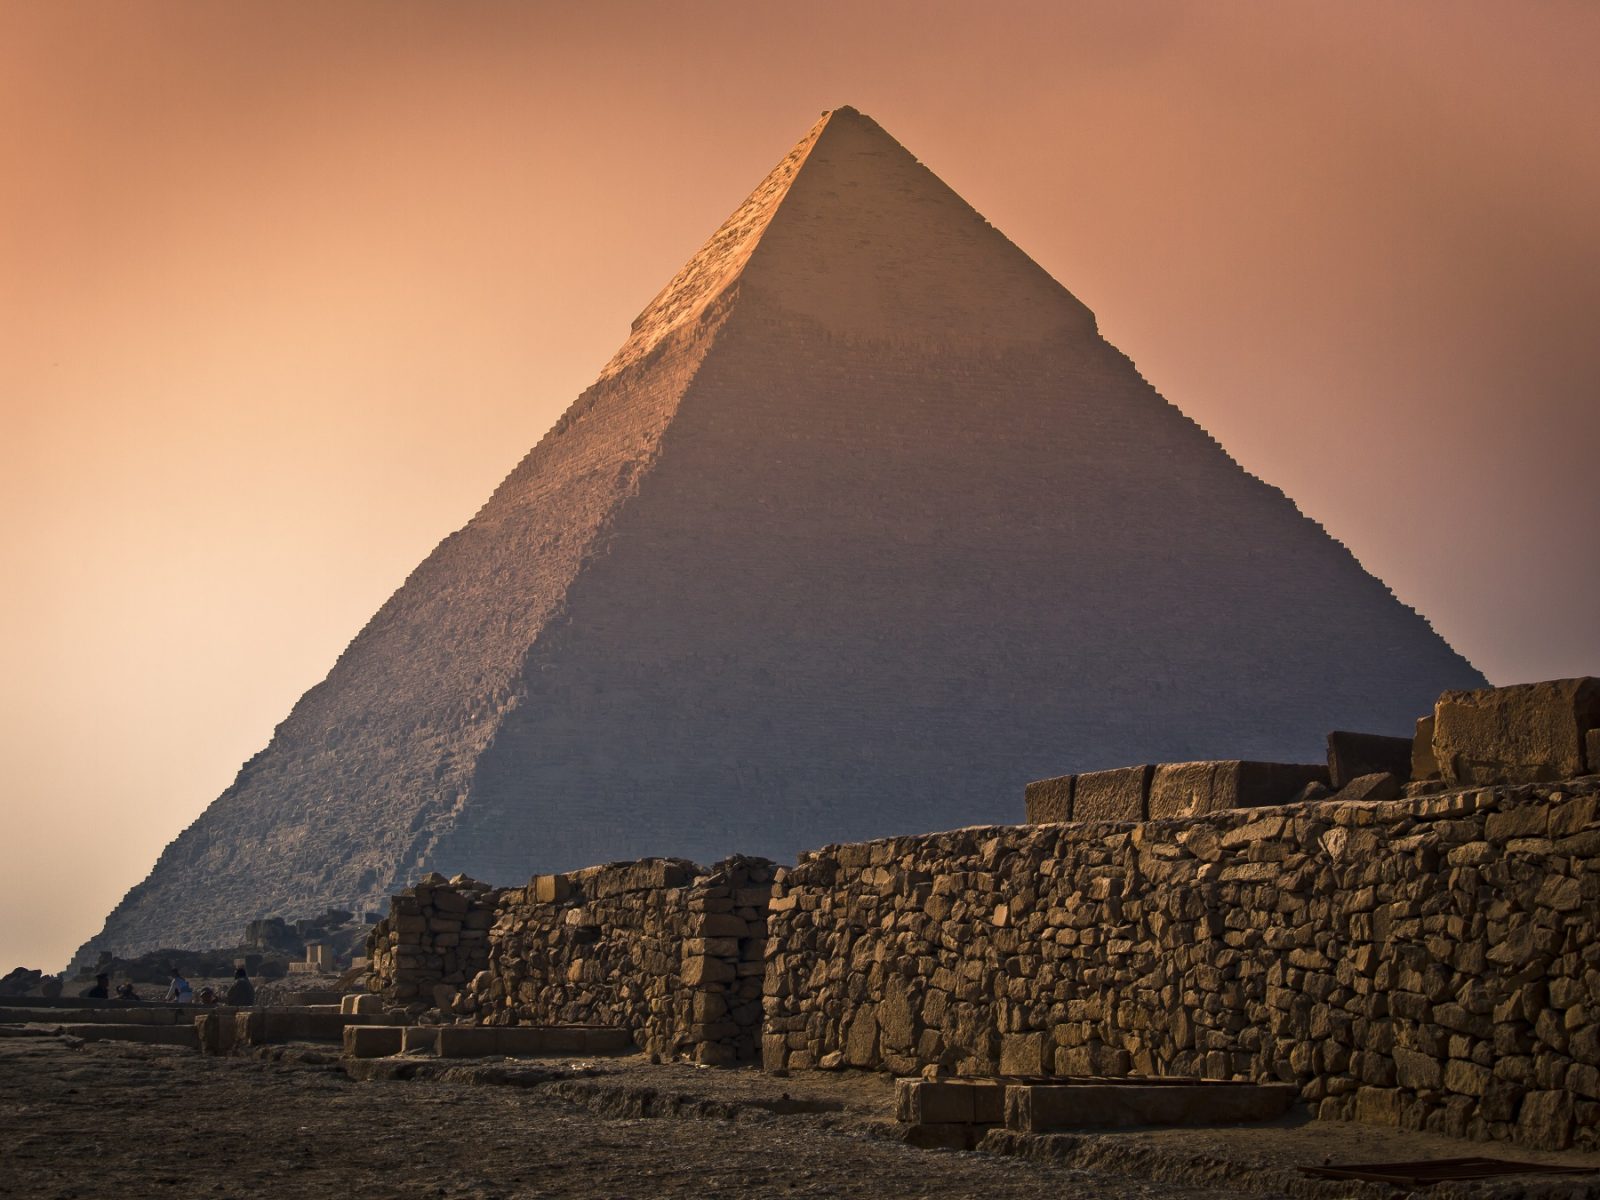 The Pyramid Of Khafre Egypts Second Largest Pyramid What You Need To Know Pyramidomania 